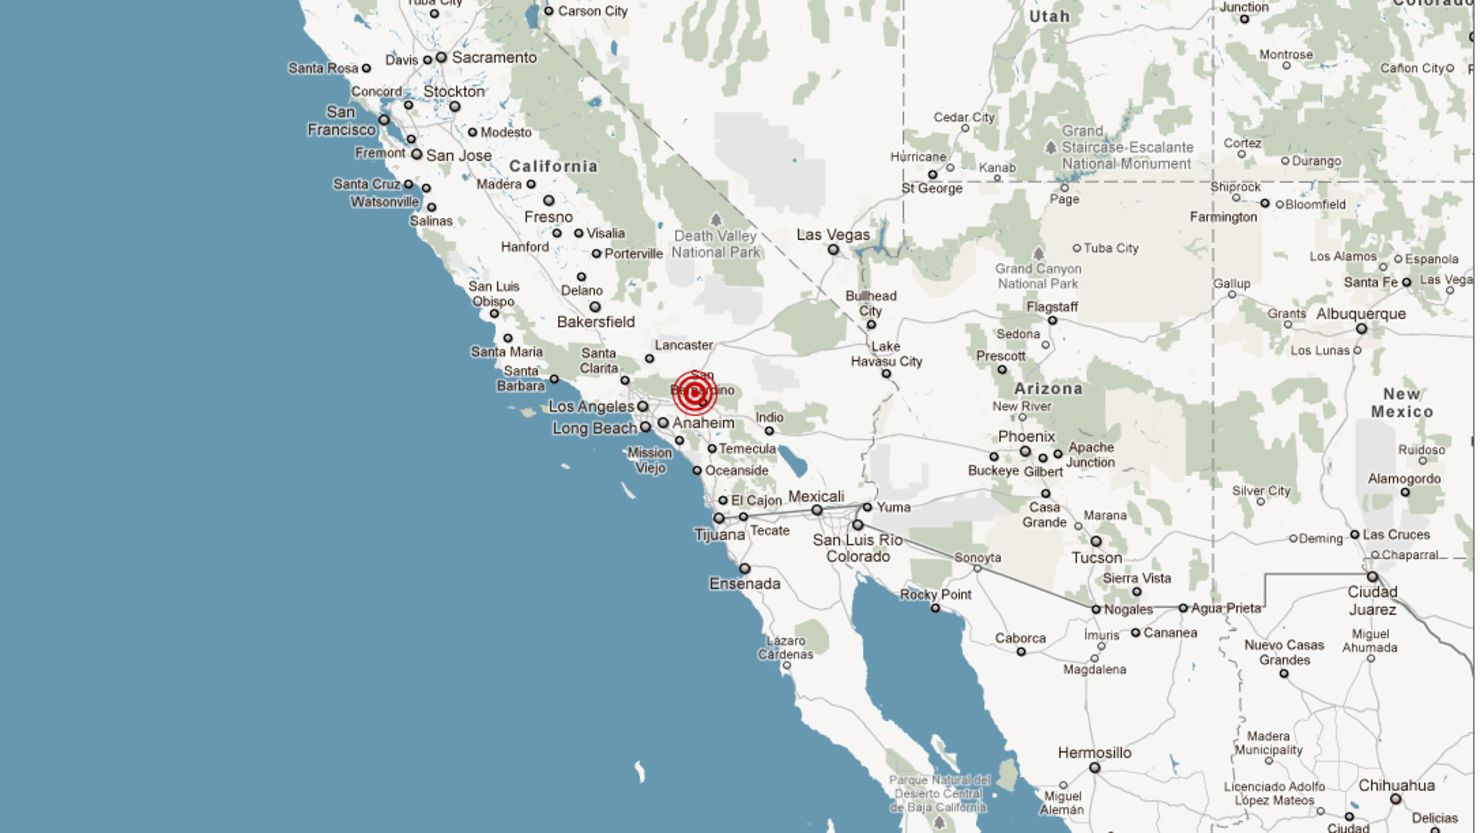 The epicenter of the quake was just outside Devore, in San Bernardino County near the San Andreas Fault.